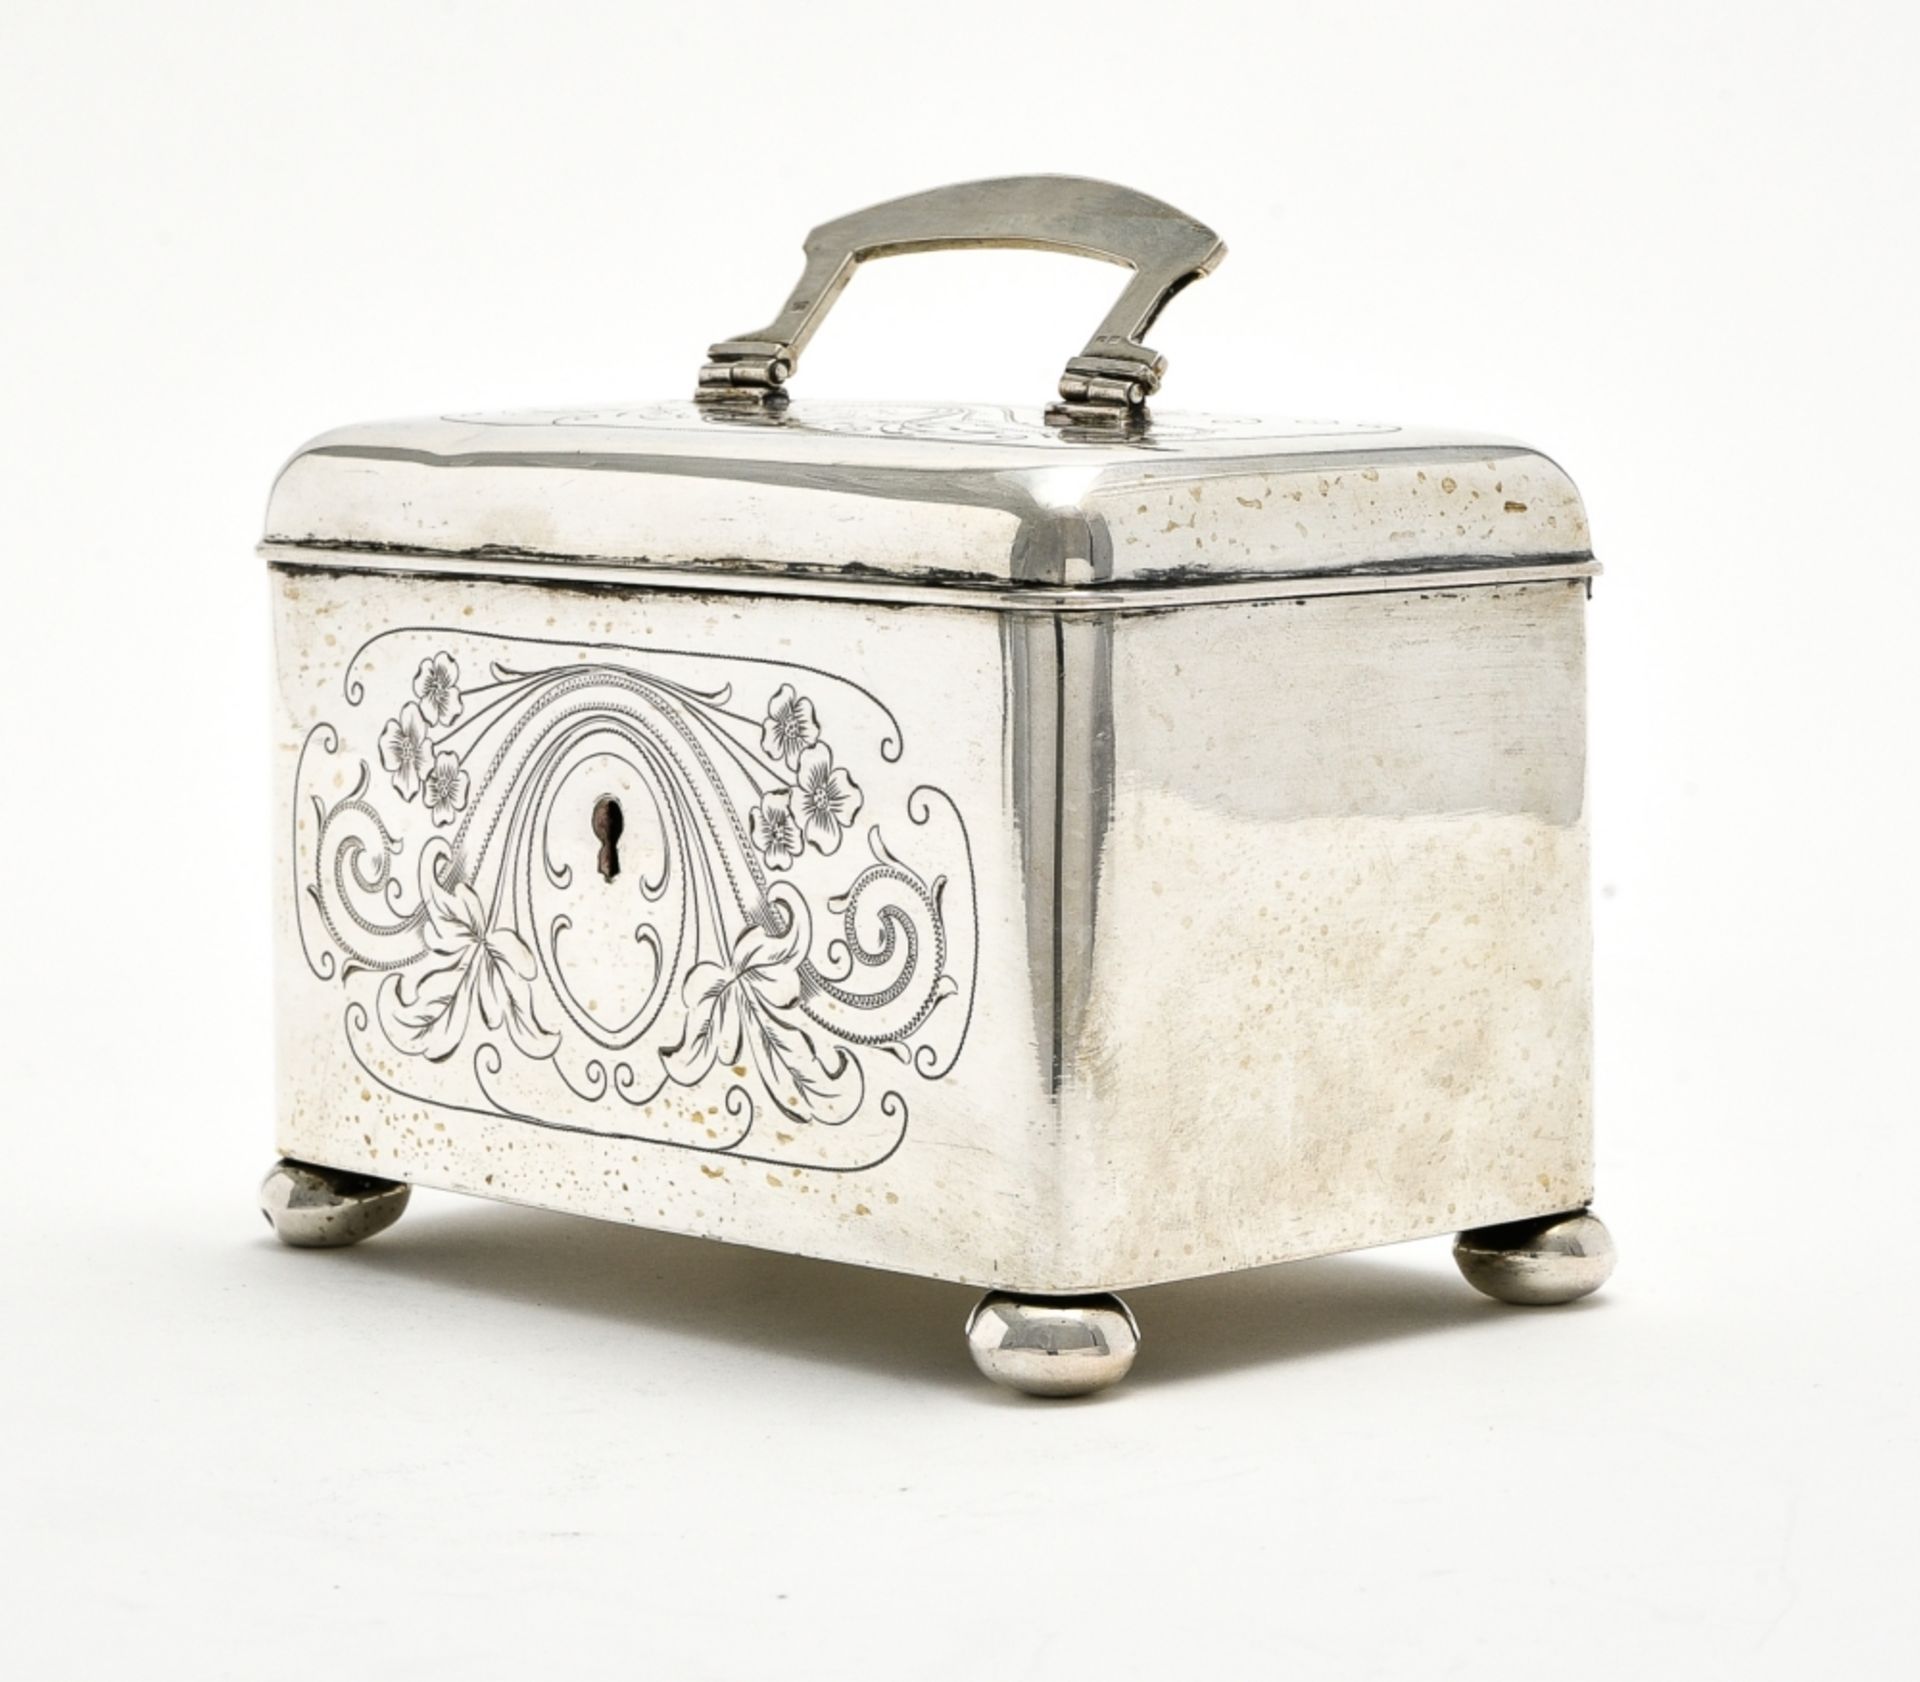 Box AUSTRIA-HUNGARY, LATE 19TH CENTURY 800 silver, engraved floral dŽcor and initials AB.